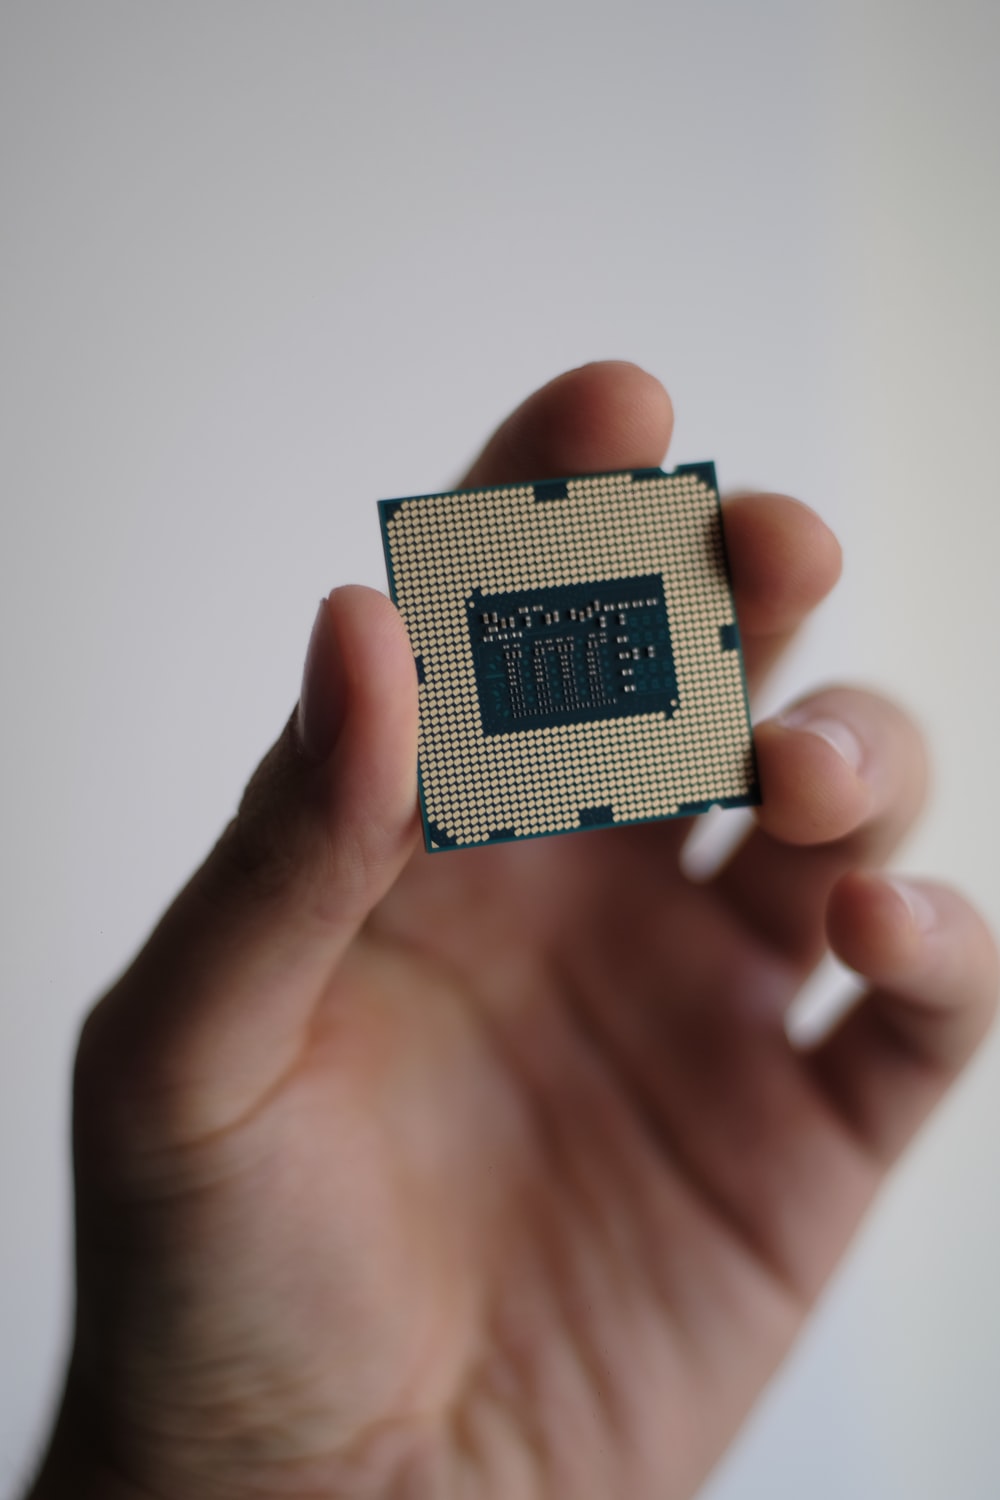 1K+ Processor Picture. Download Free Image